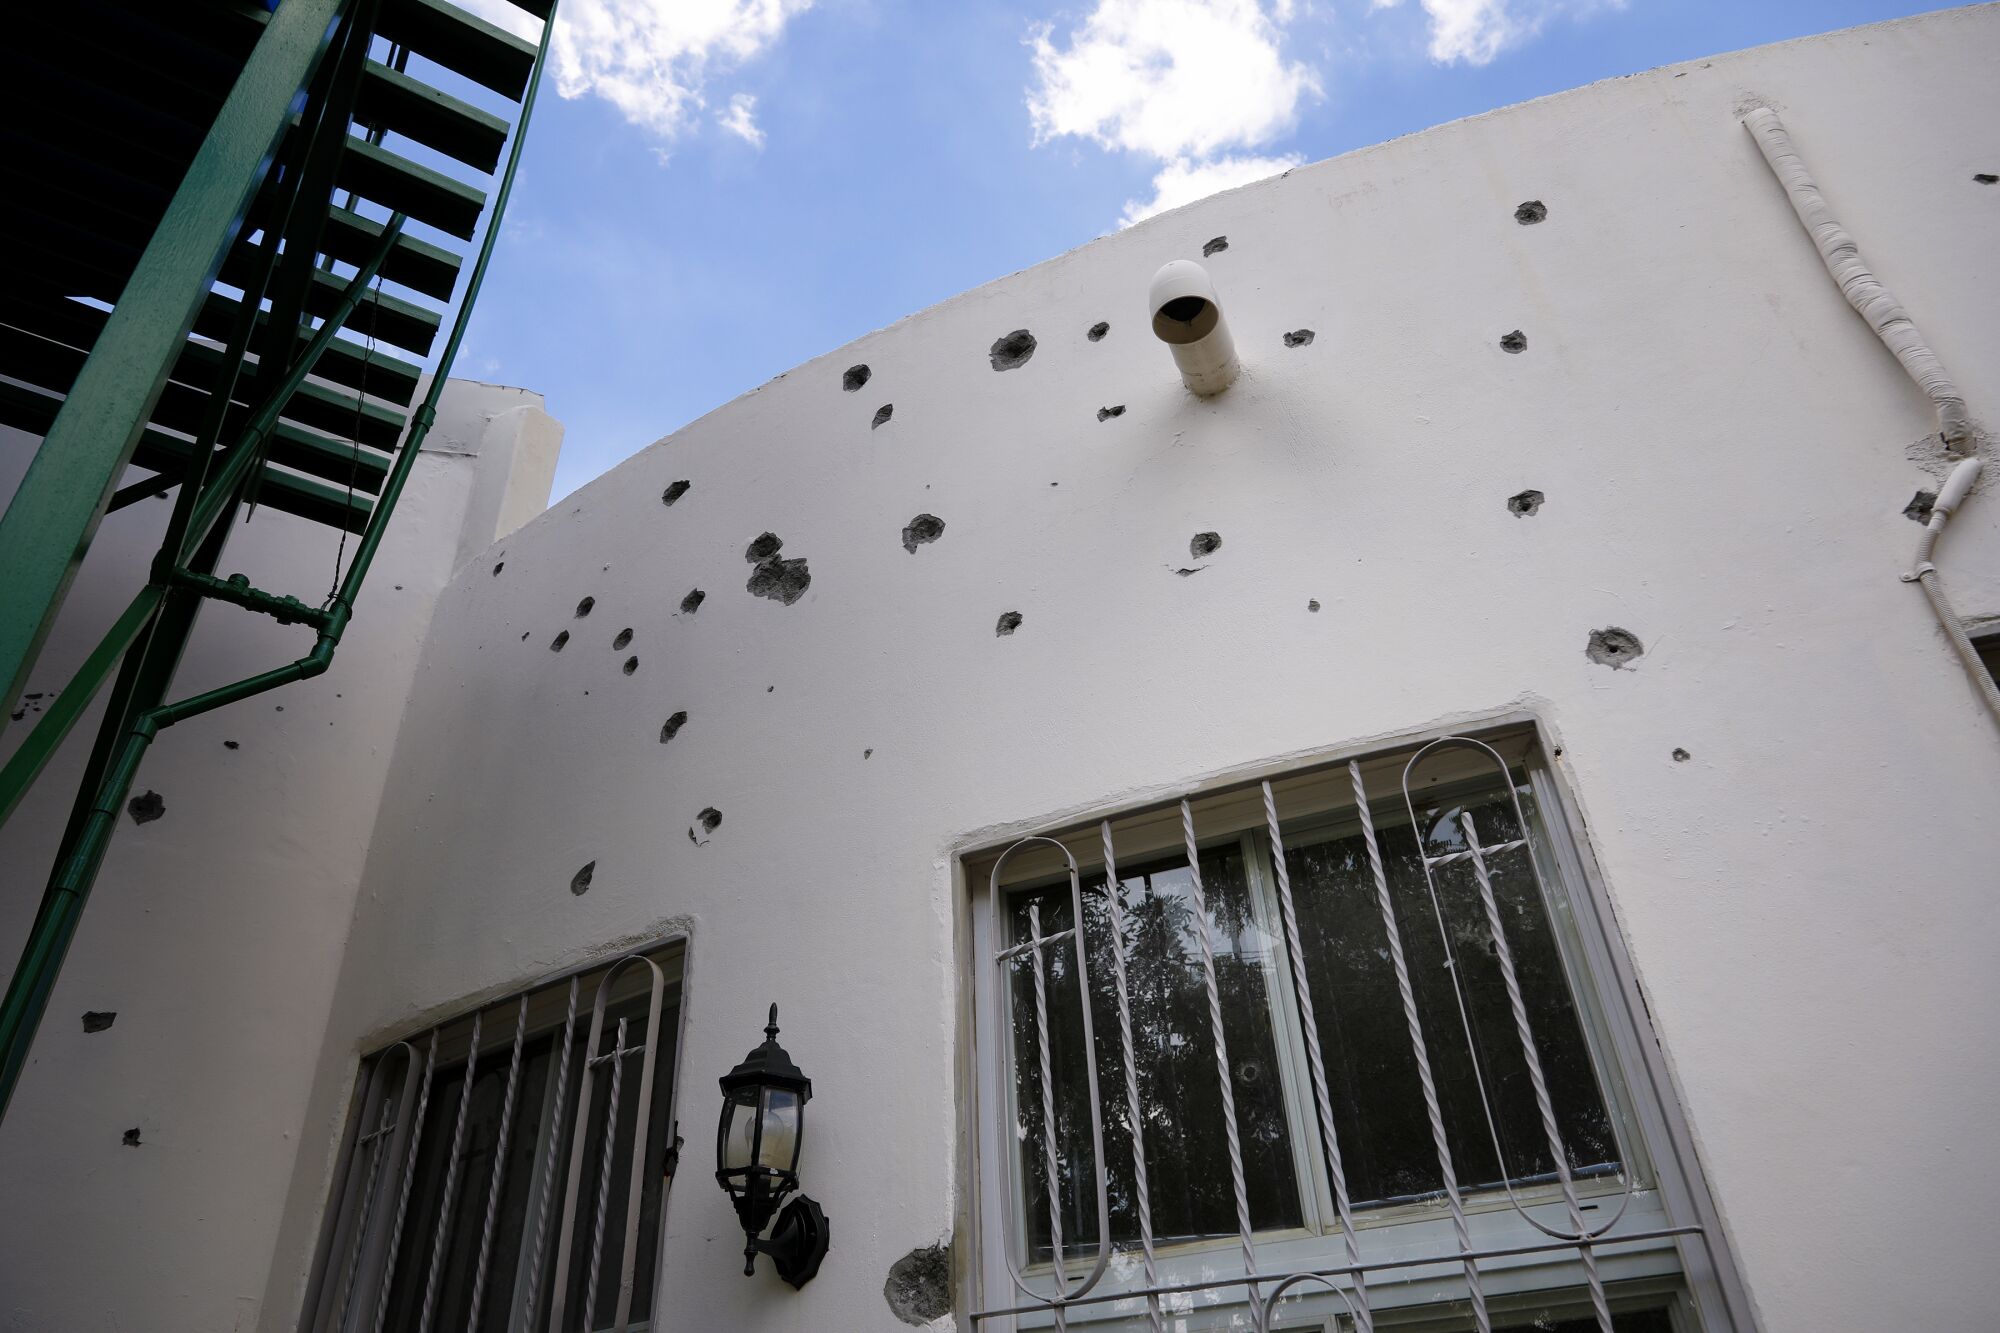 Bullet holes riddle the sides and glass windows of the chapel at Parroquia Jesus de la Divina Misericordia, a Catholic church in Managua where student protesters took refuge in July 2018. The church has consciously preserved these signs of repression.